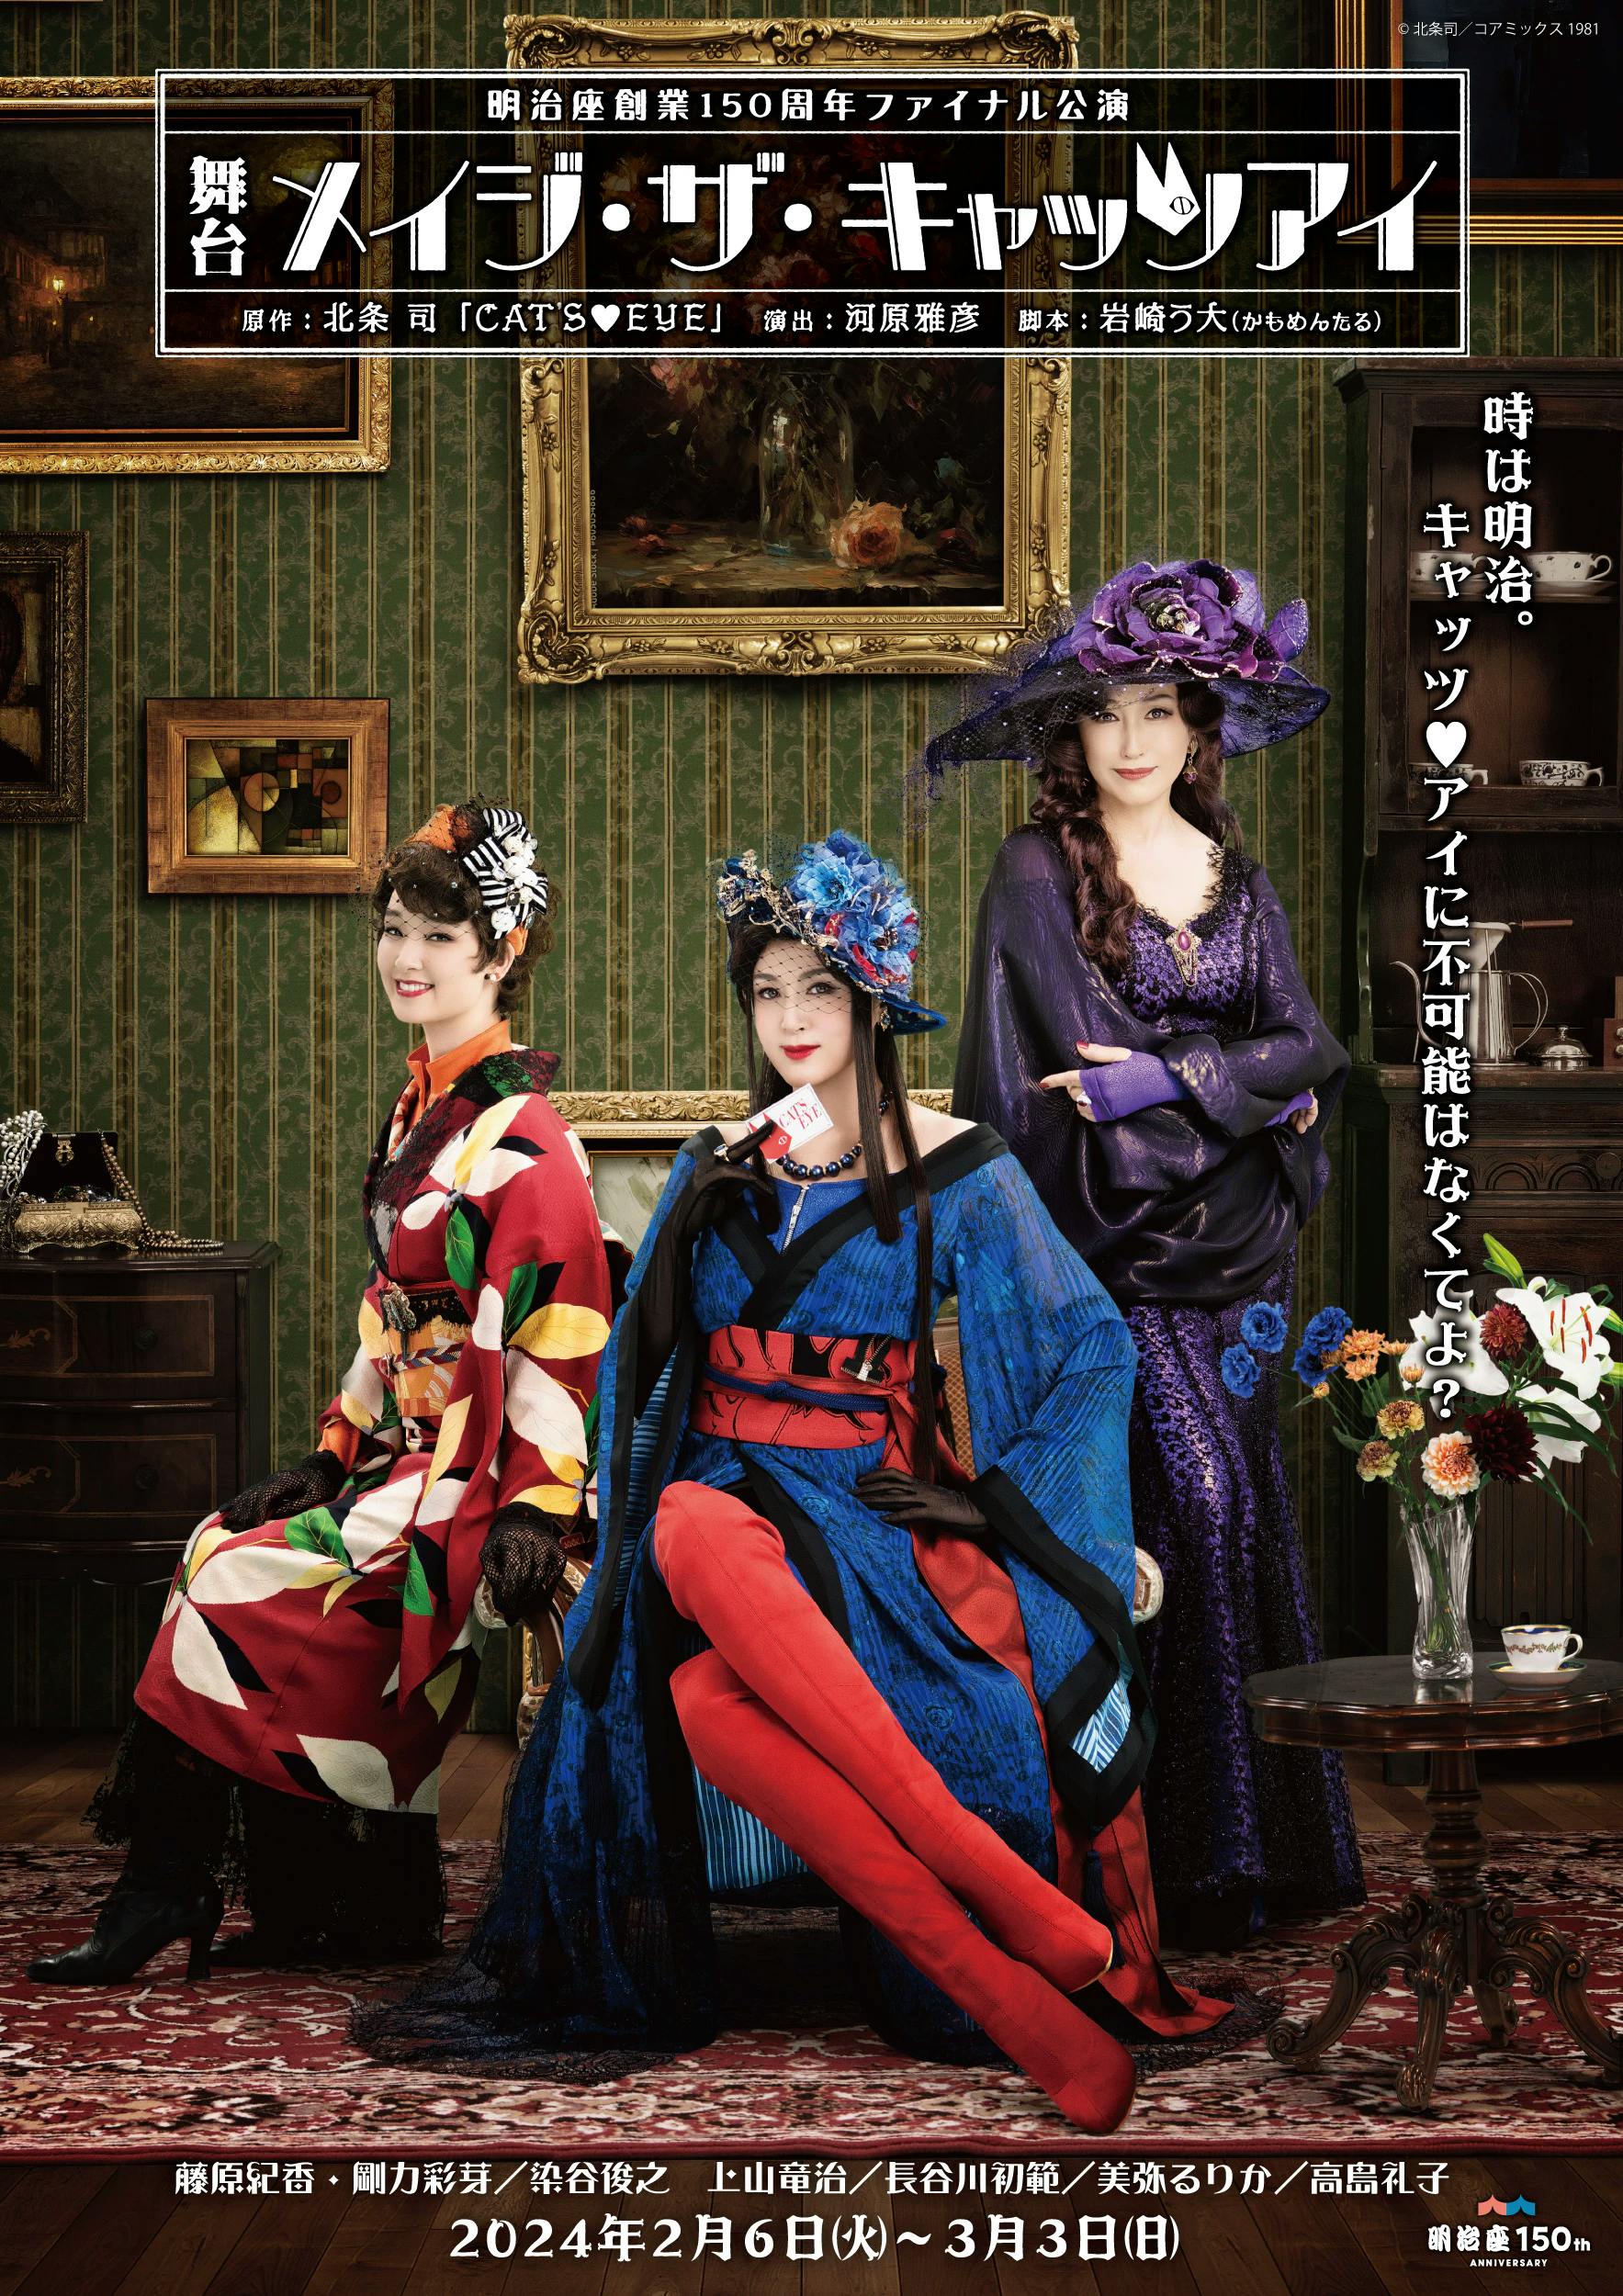 Starring Norika Fujiwara, Ayame Goriki, and Reiko Takashima, Meijiza's 150th anniversary final performance stage play "Mage the Cat's Eye" The first gorgeous visual of the three lead actors has been released!